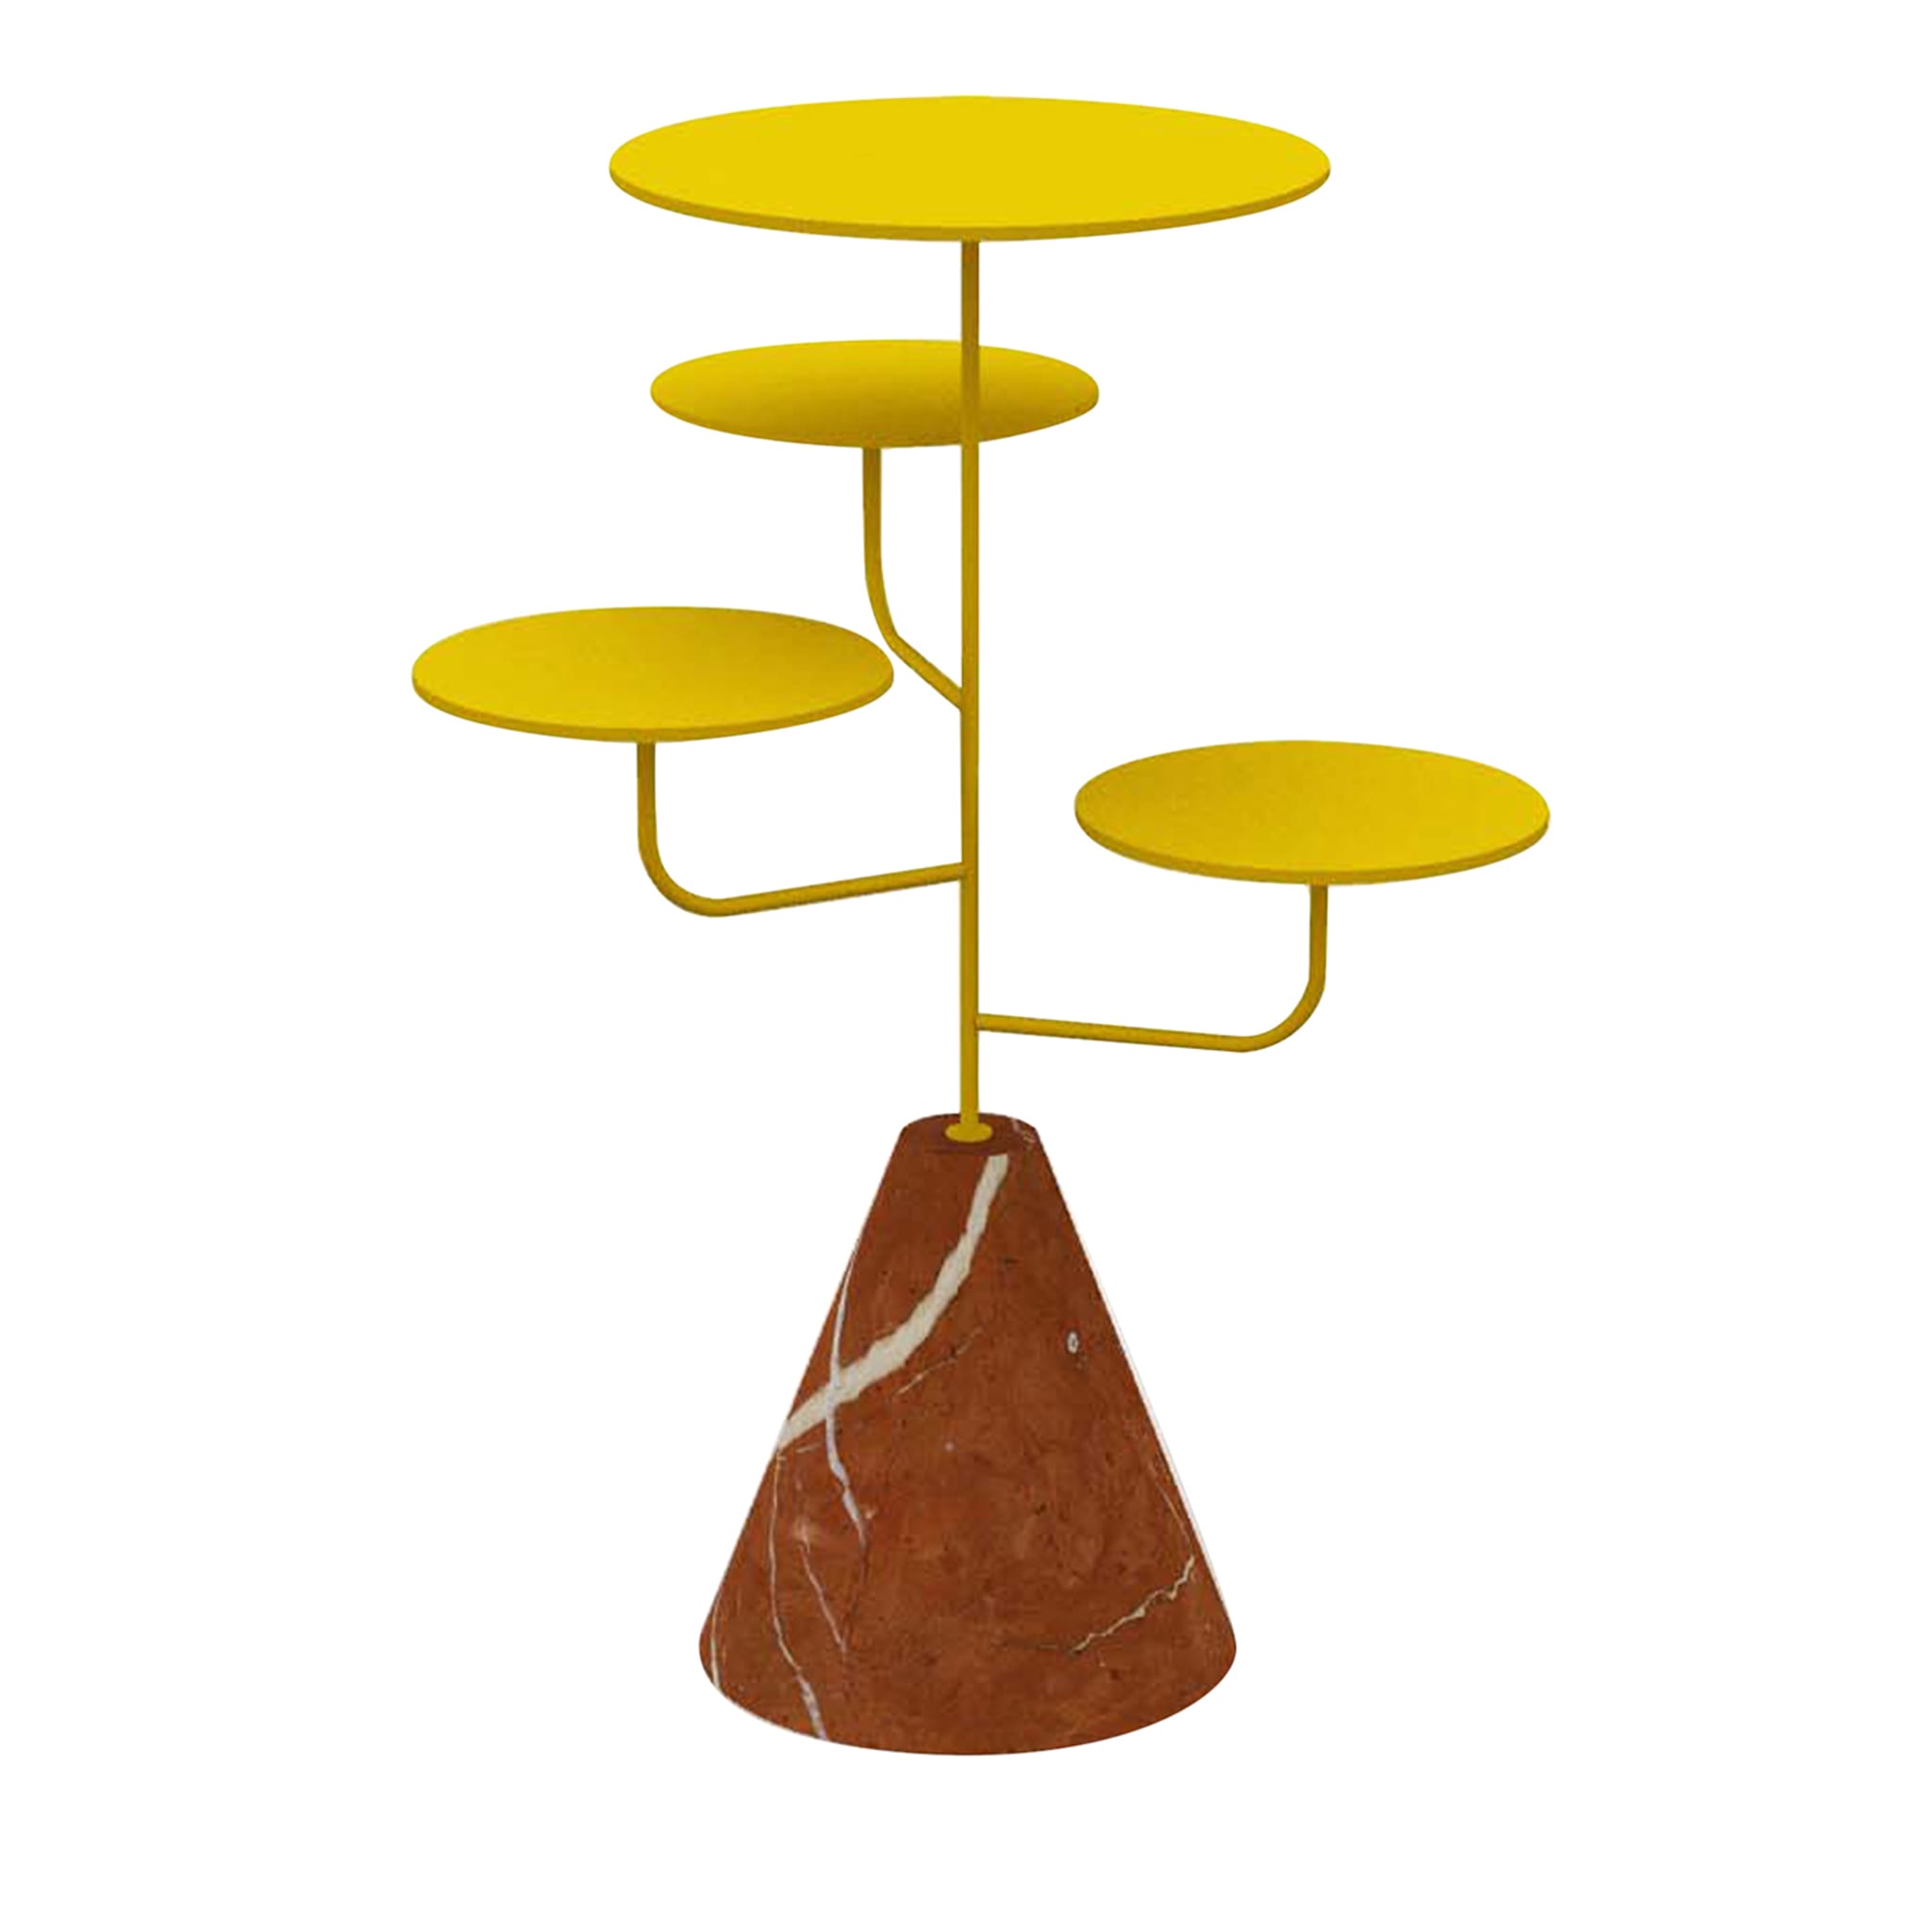 Condiviso 4-Tier Yellow/Red Alicante Serving Stand - Main view